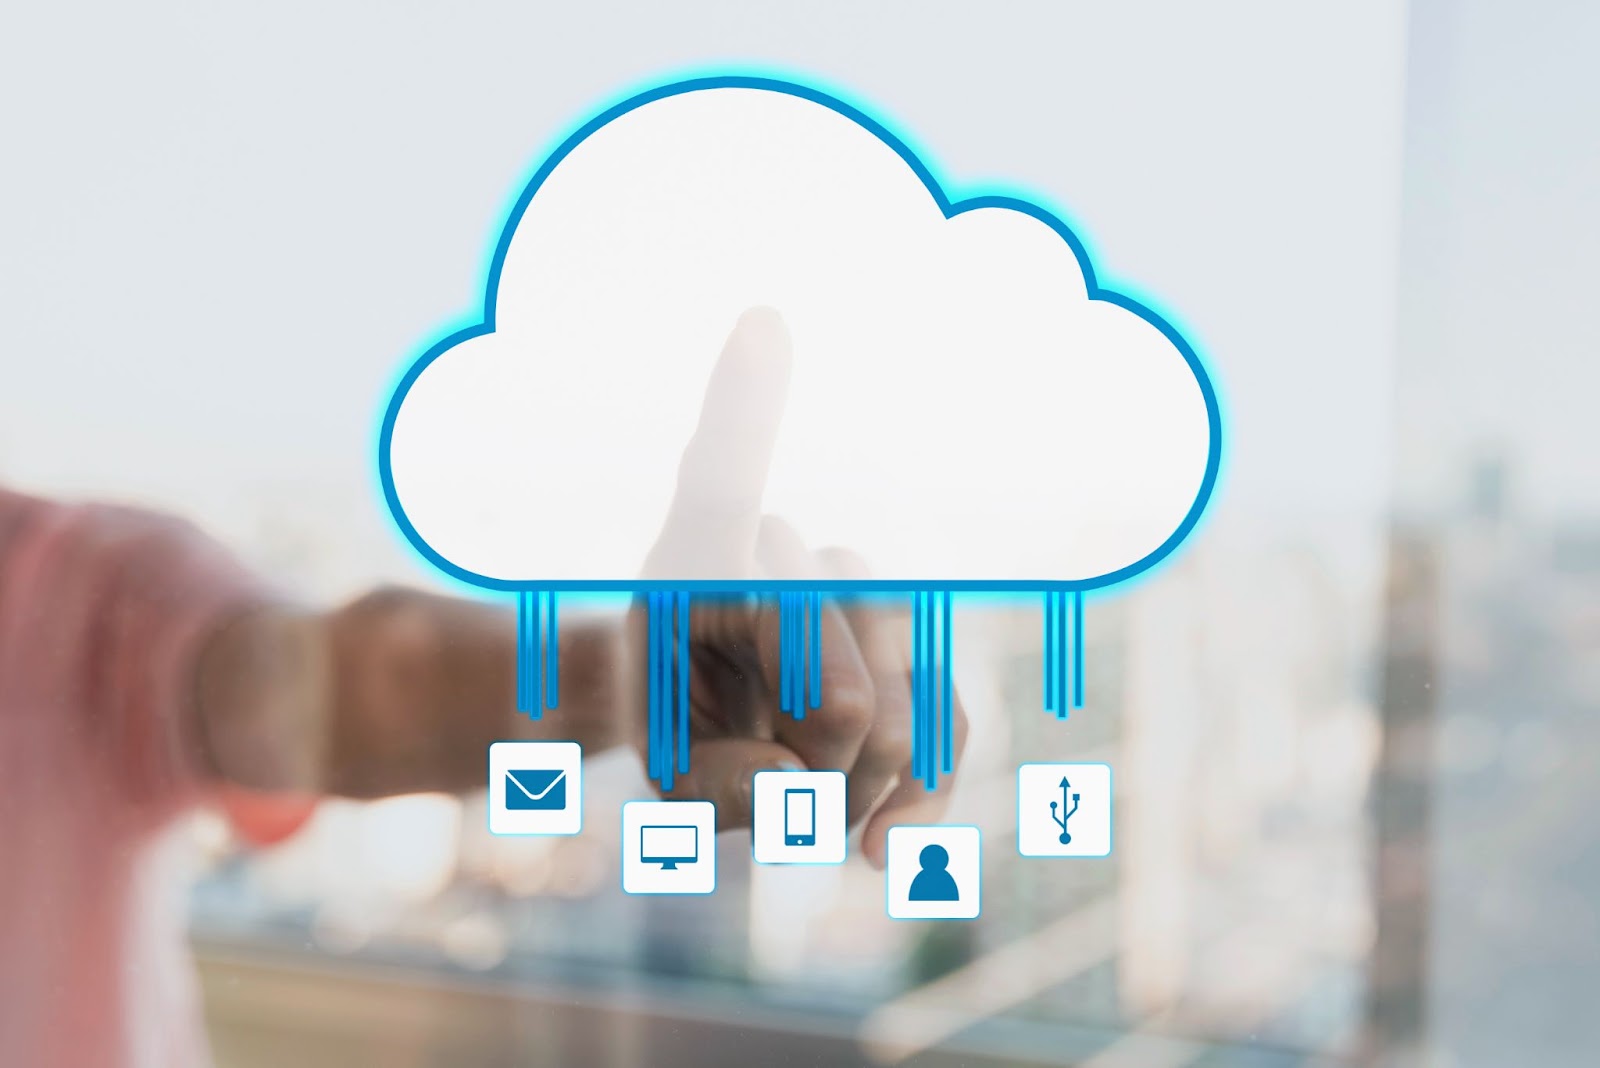 To be able to grasp Cloud Native, there are key factors we need to understand.